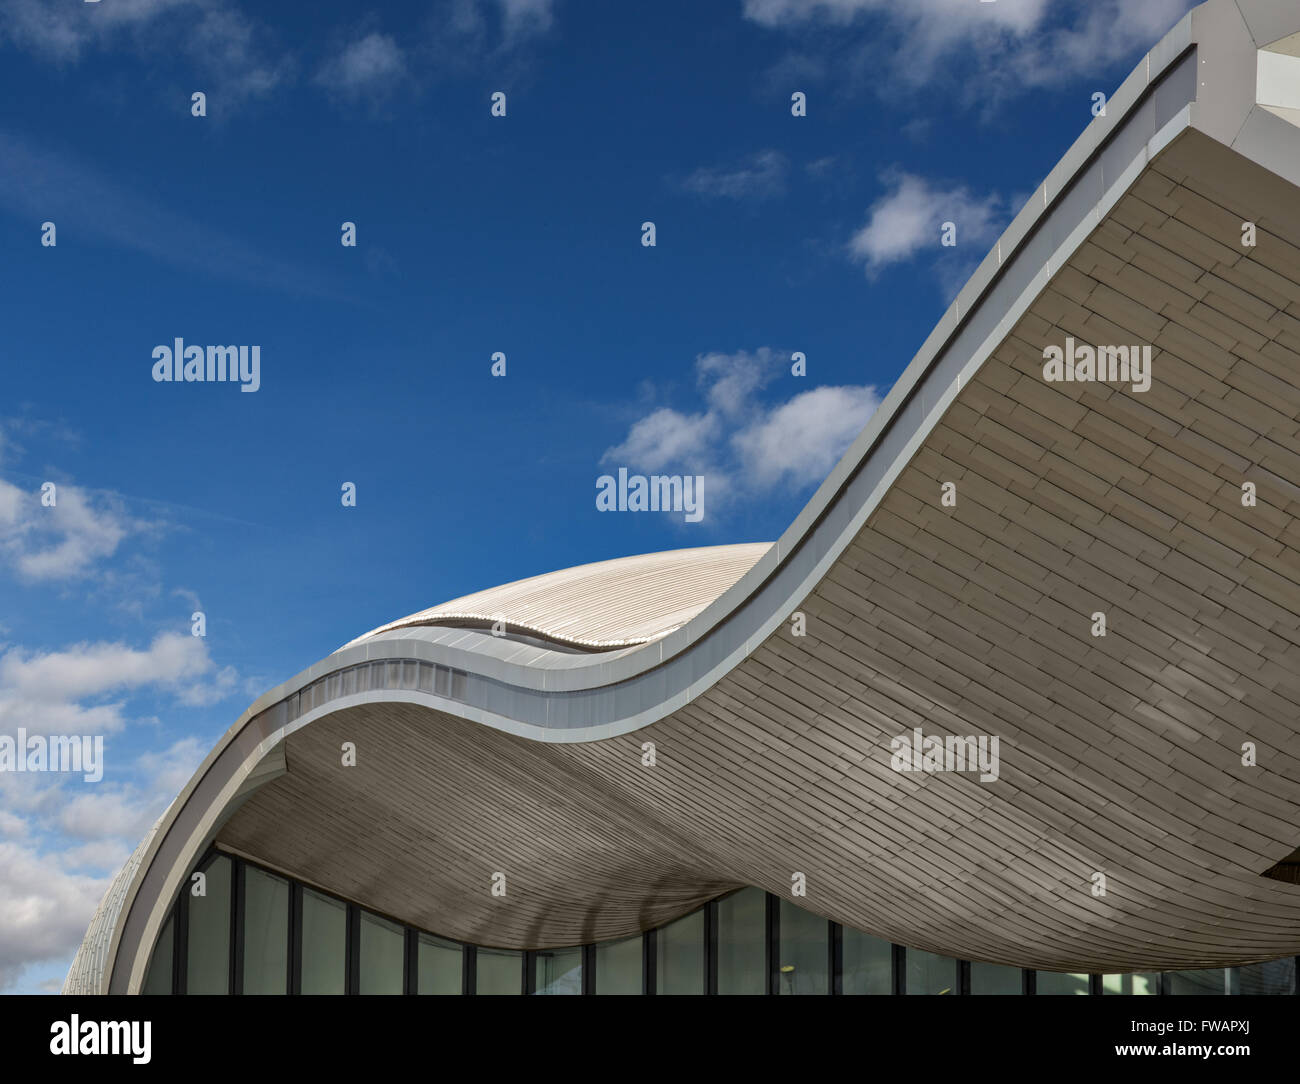 Slough Bus Station designed by Bblur Architecture Stock Photo